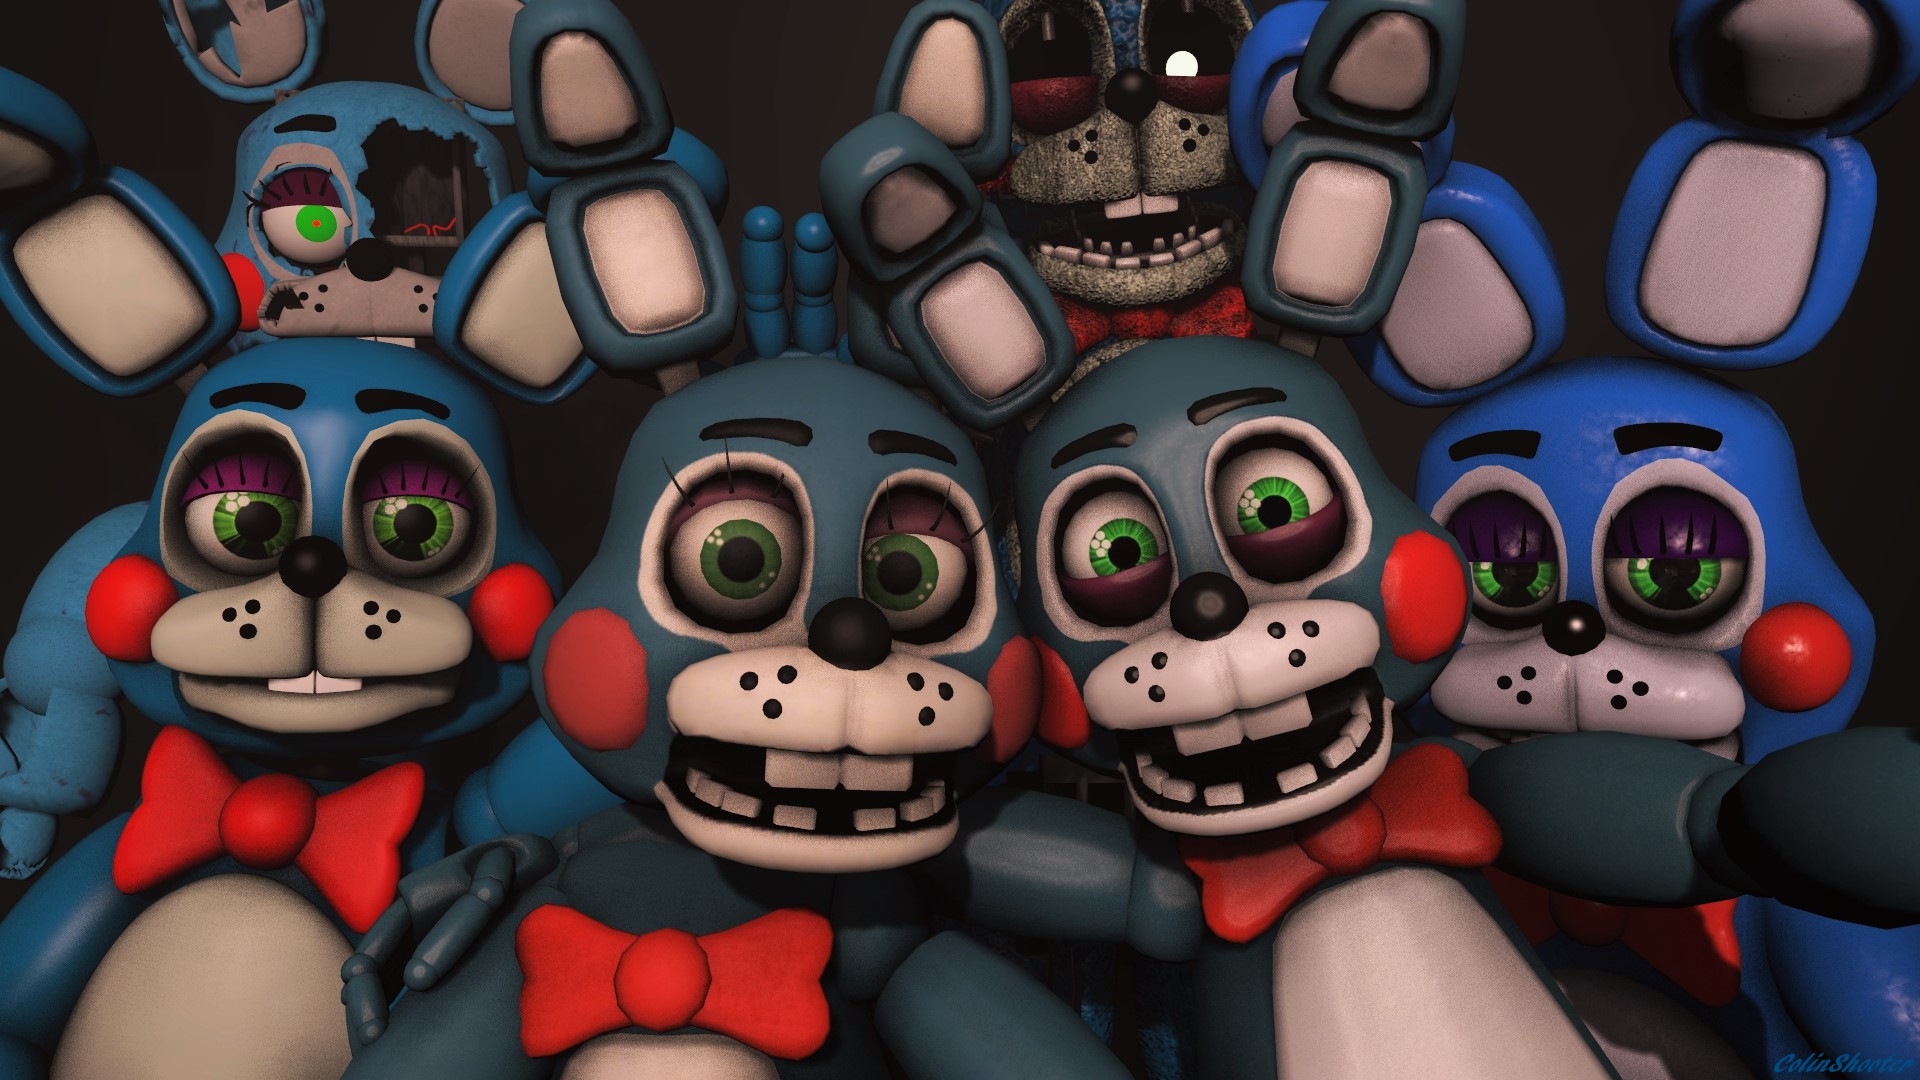 The Many faces of Toy Bonnie